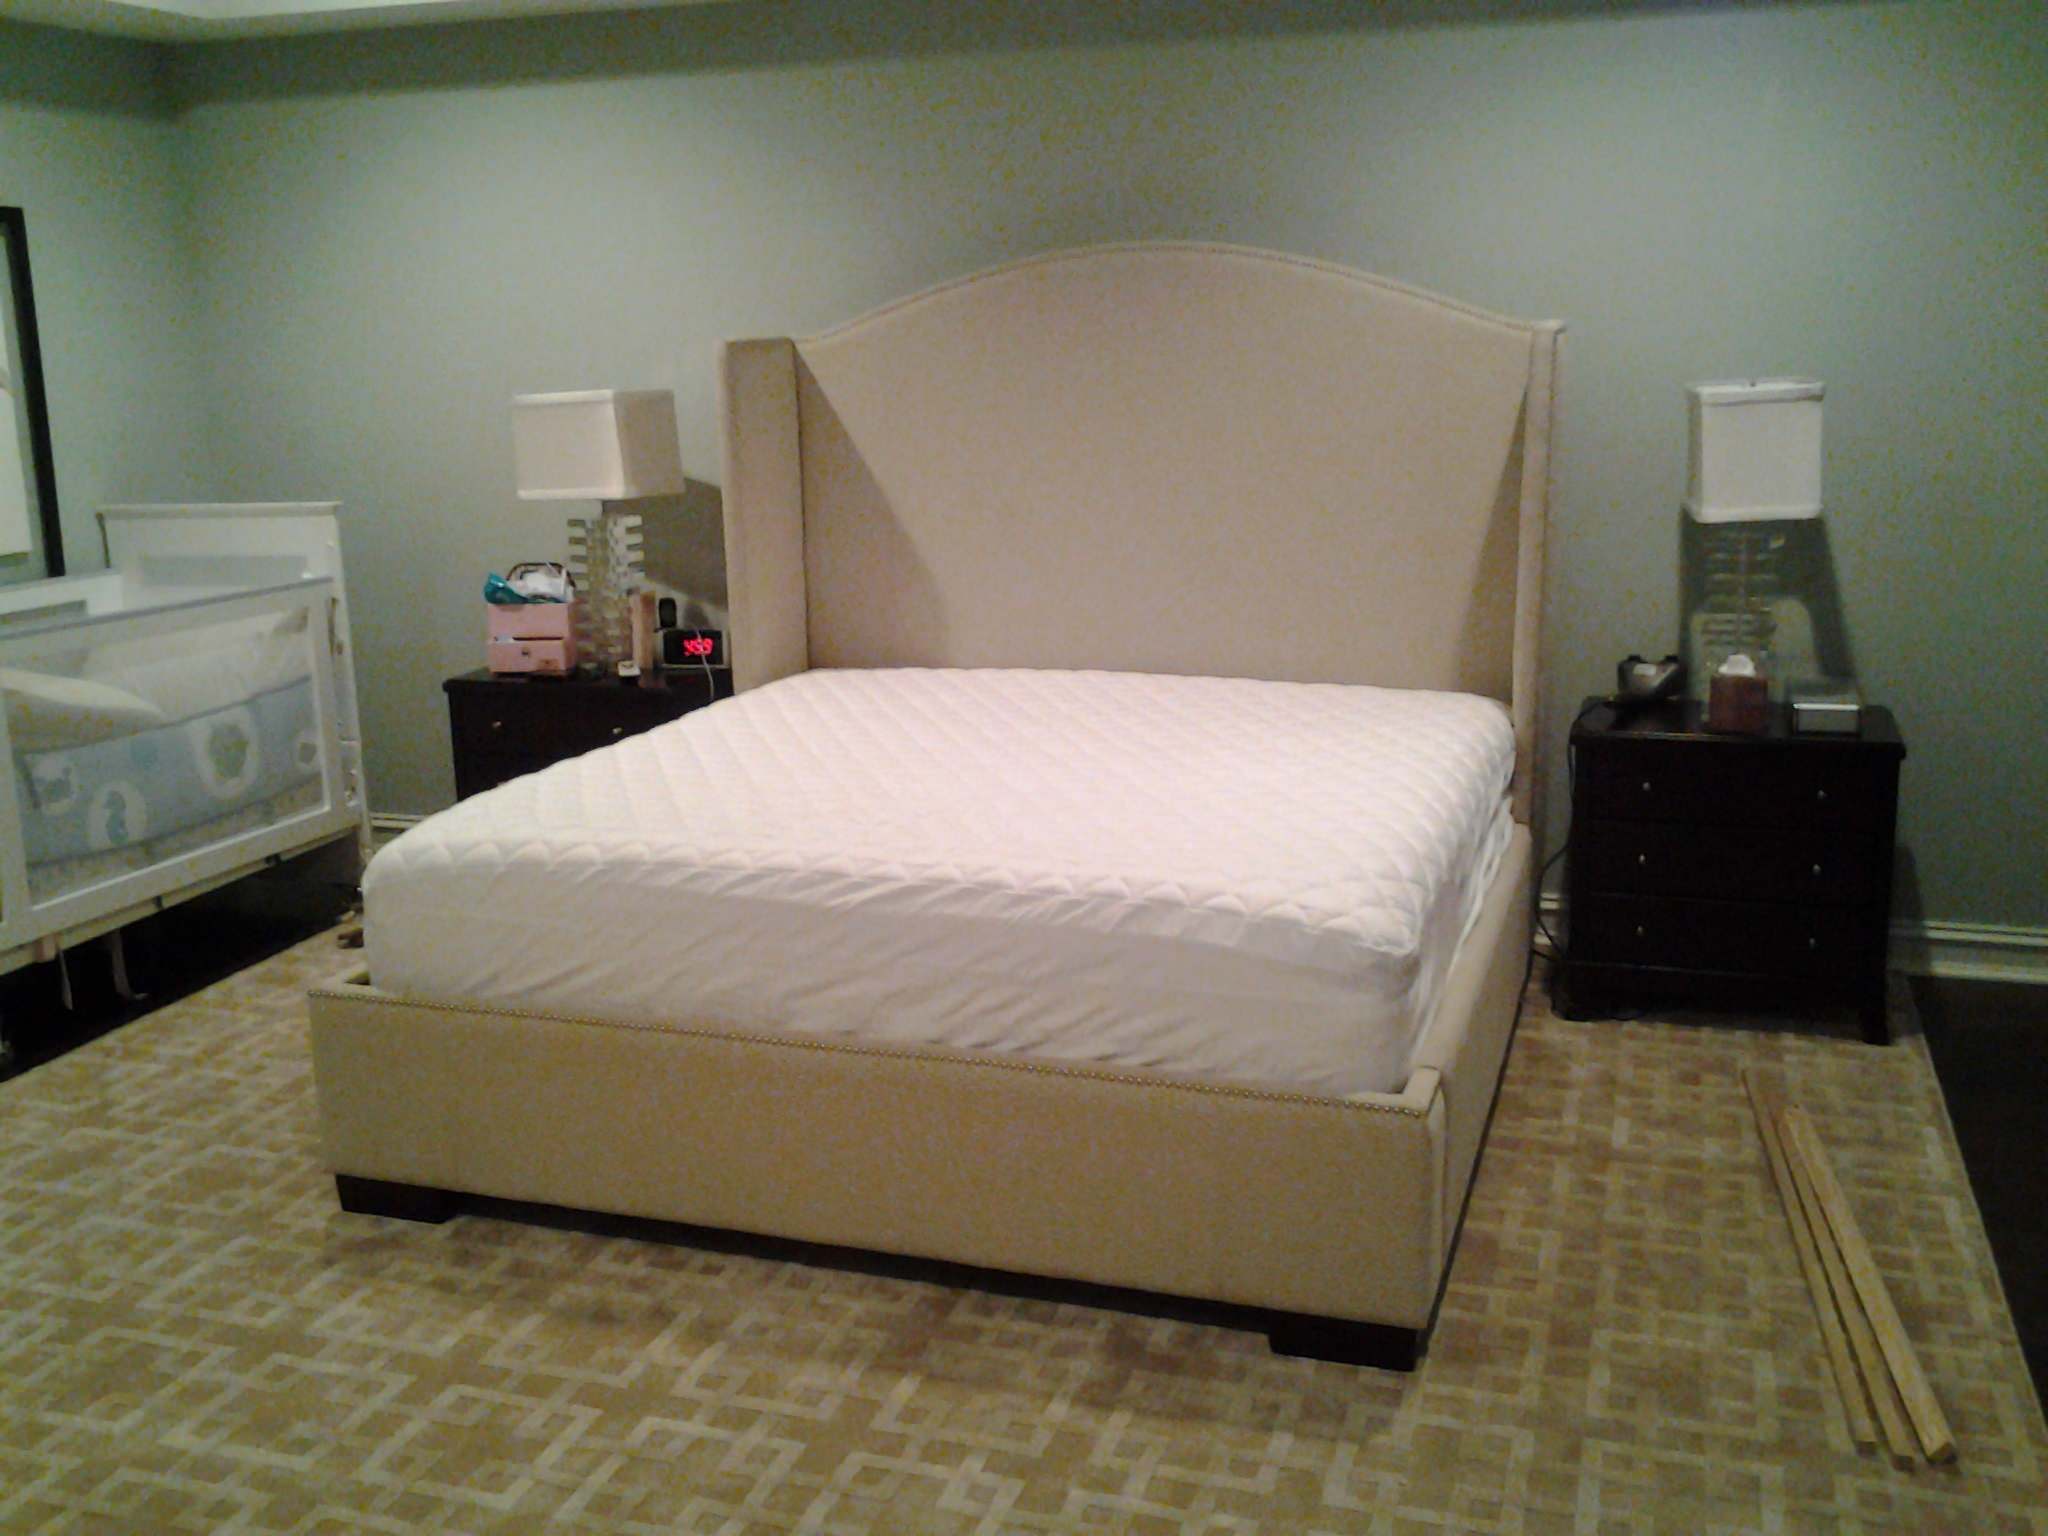 Upholstered bed with nail heads